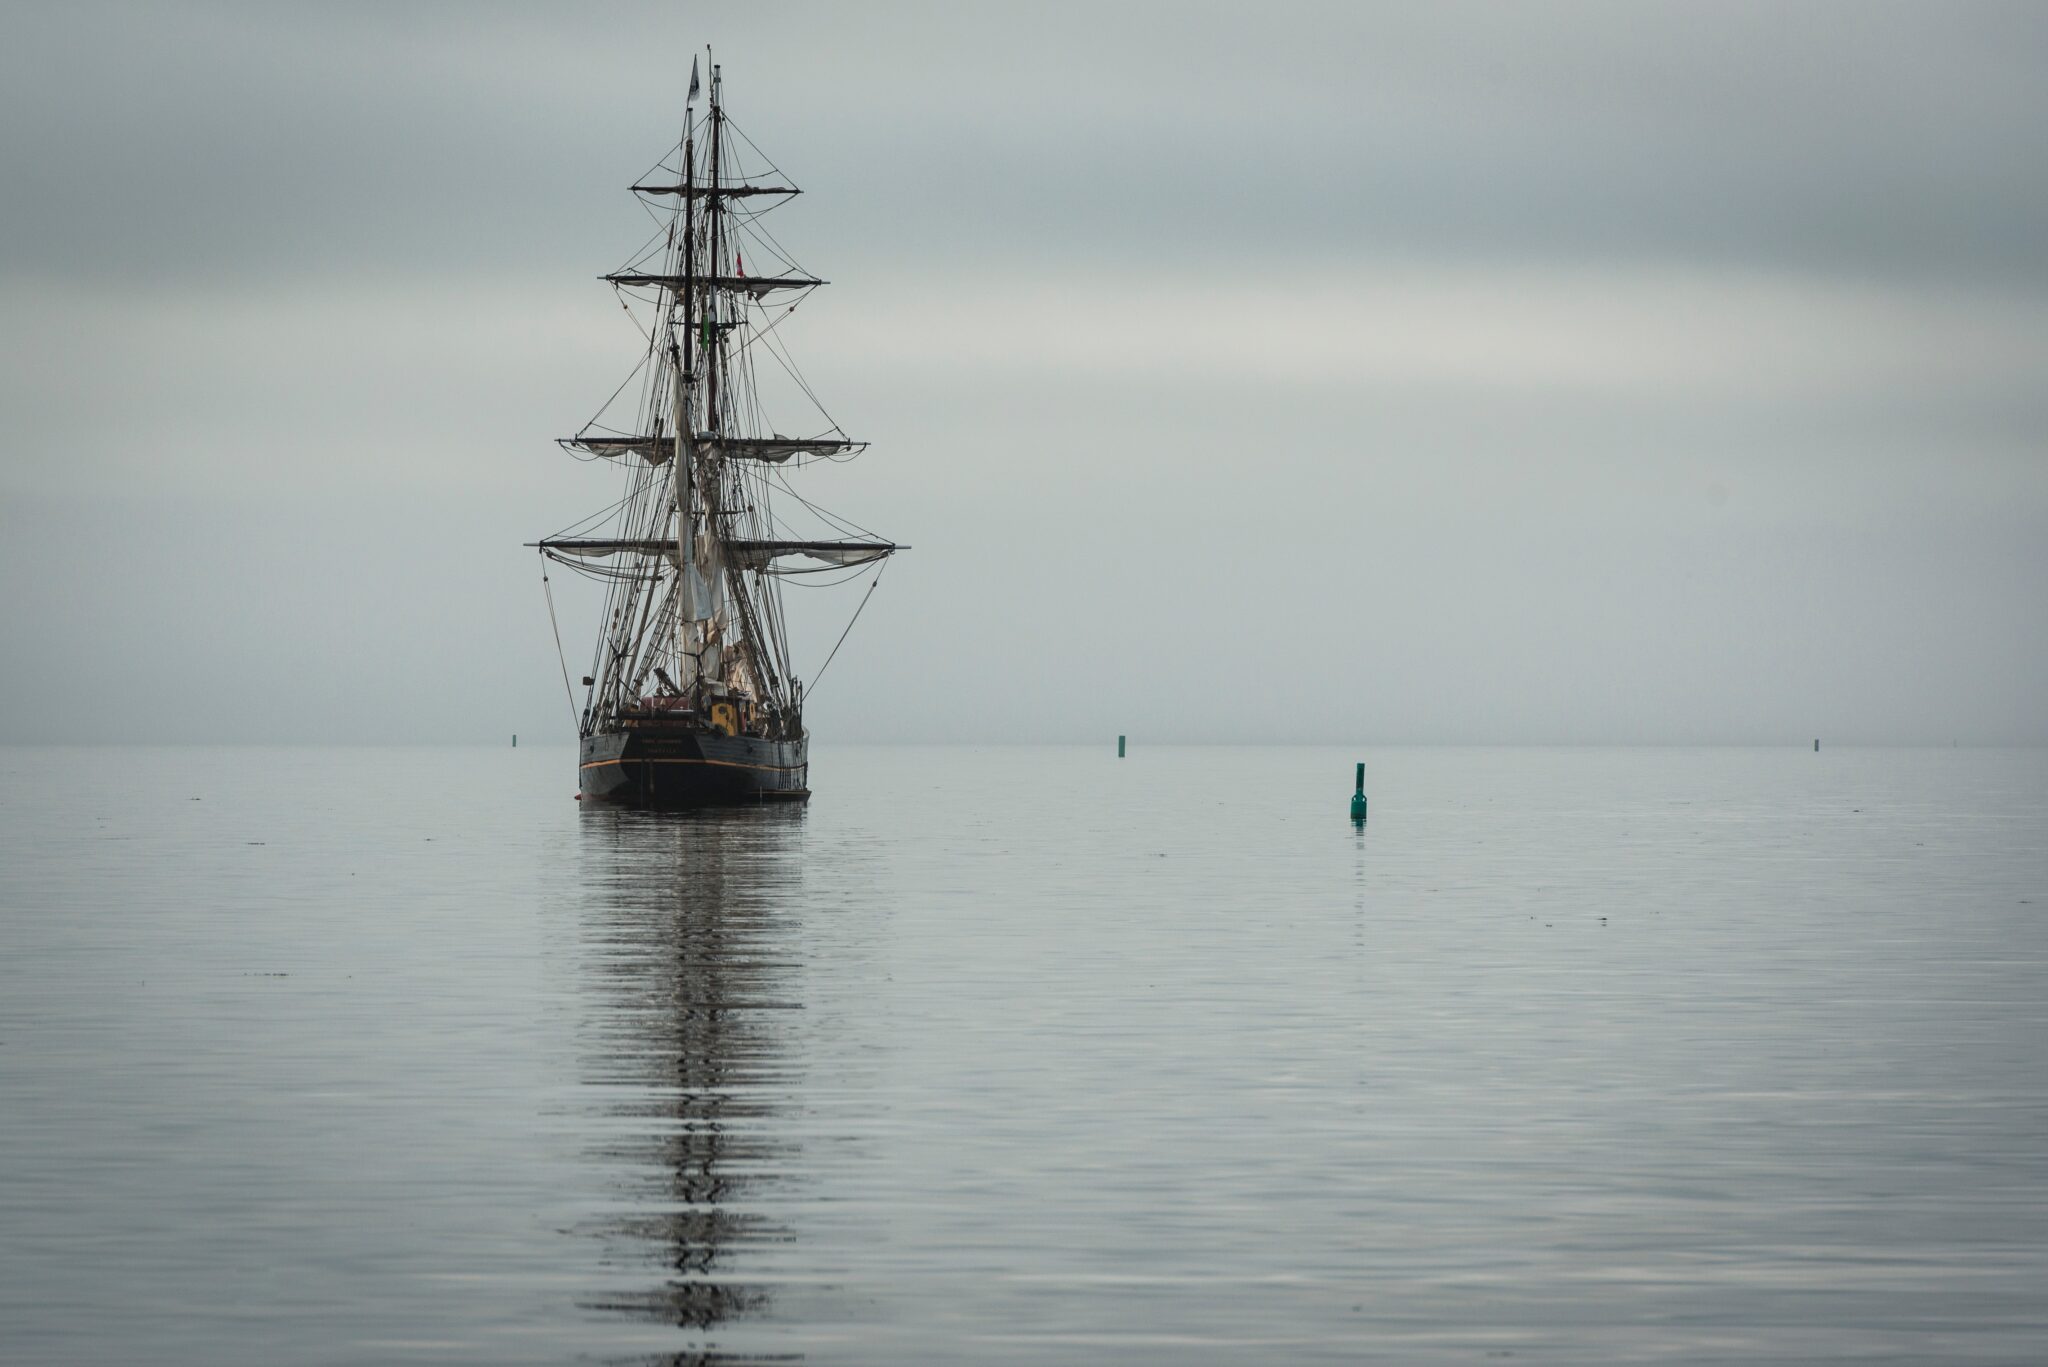 Old sail ship in the water